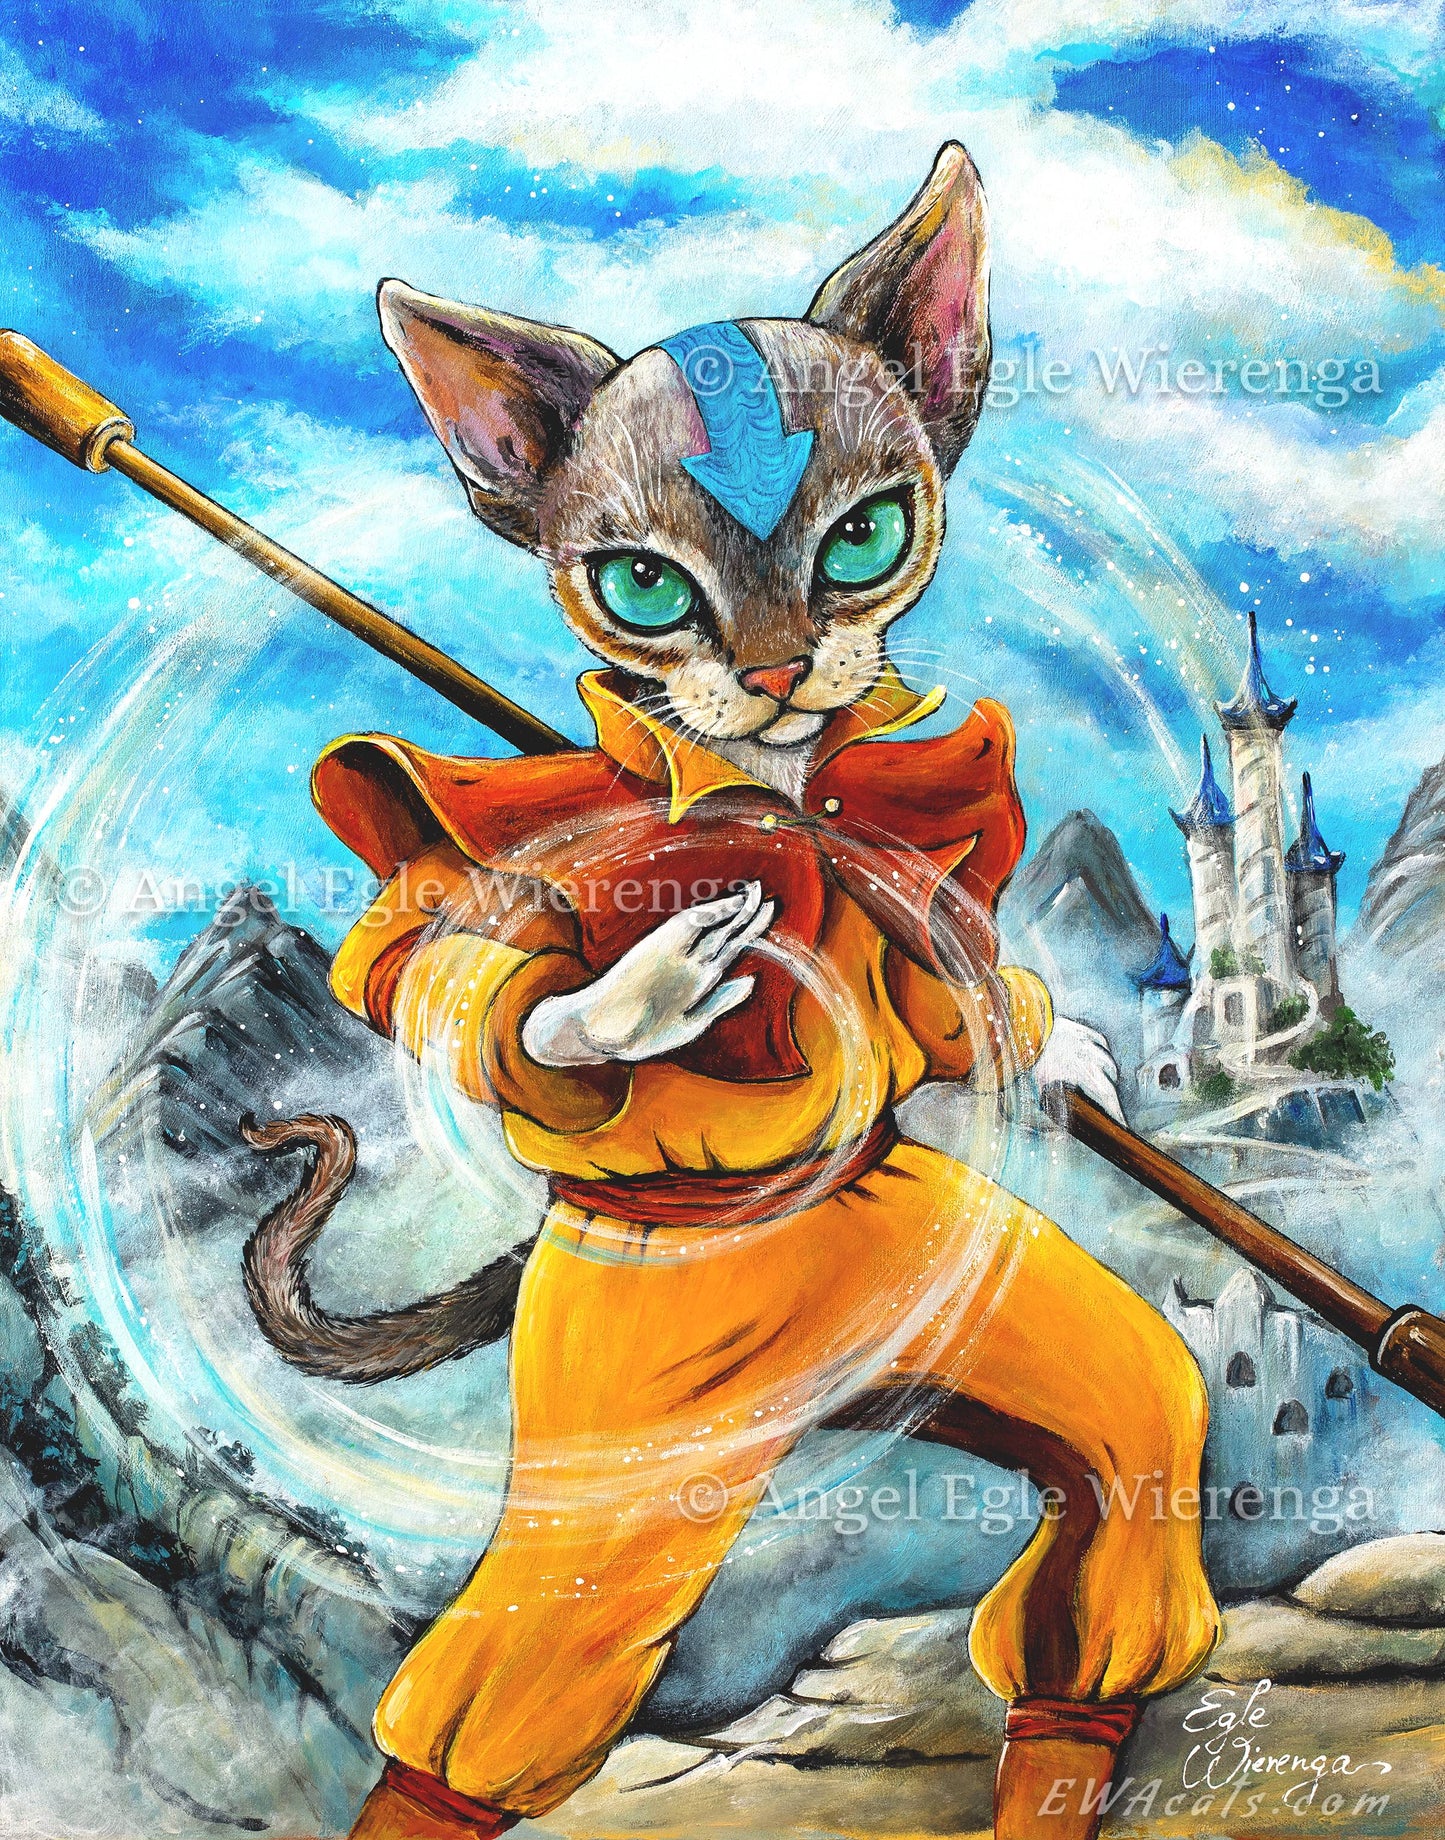 SUPREME MASTER CANVAS "Kitty Aang" Limited to 5!